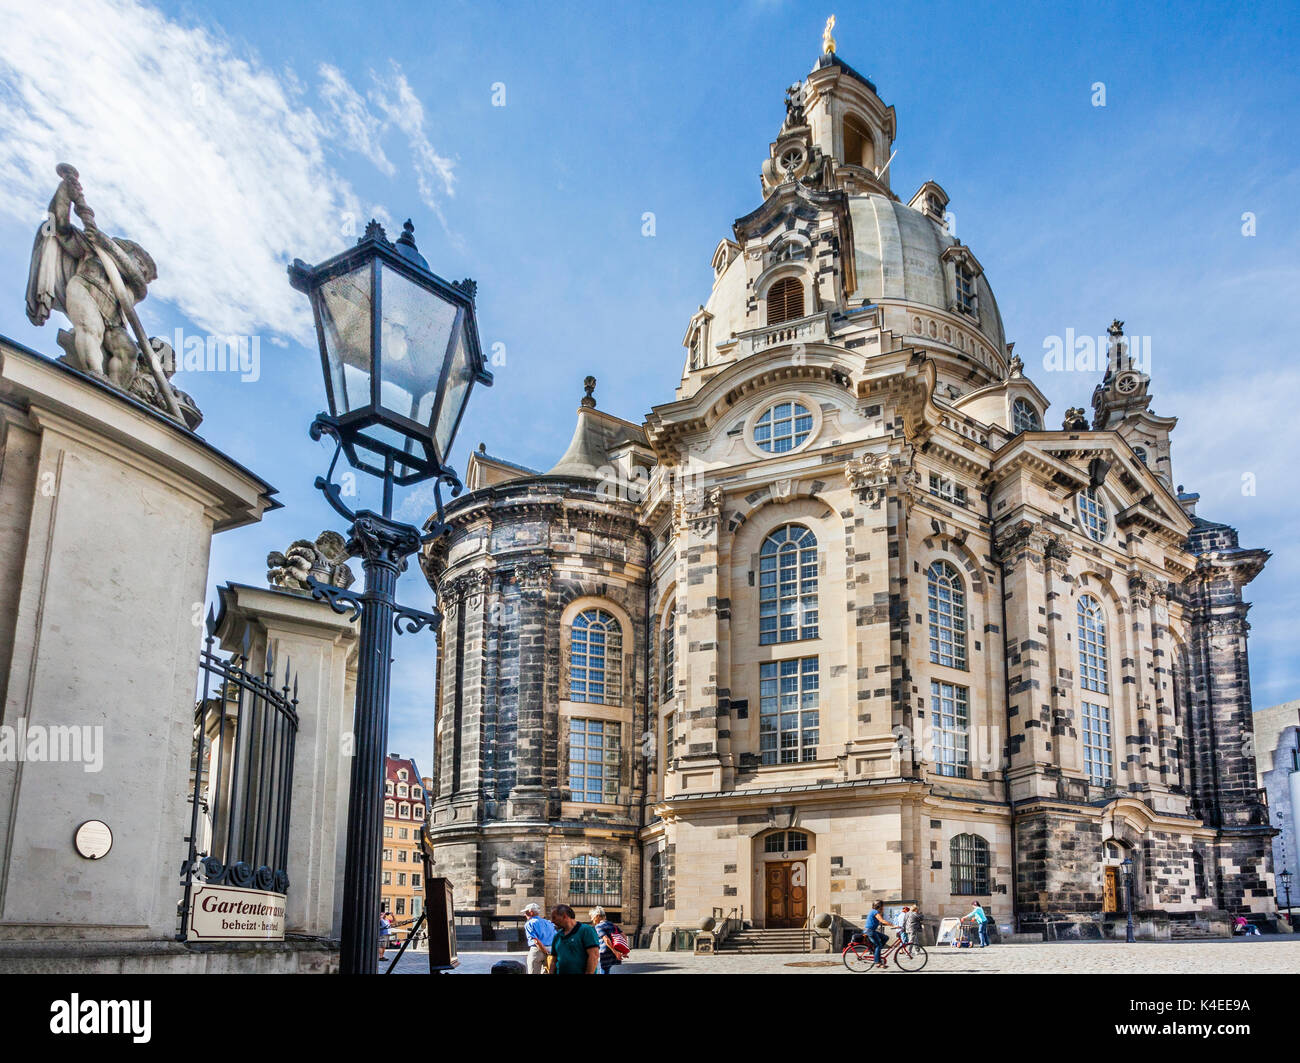 Germany, Saxony, Dresden, Neumarkt, view of the imposing sandstone dome of Dresden Frauenkirche Stock Photo